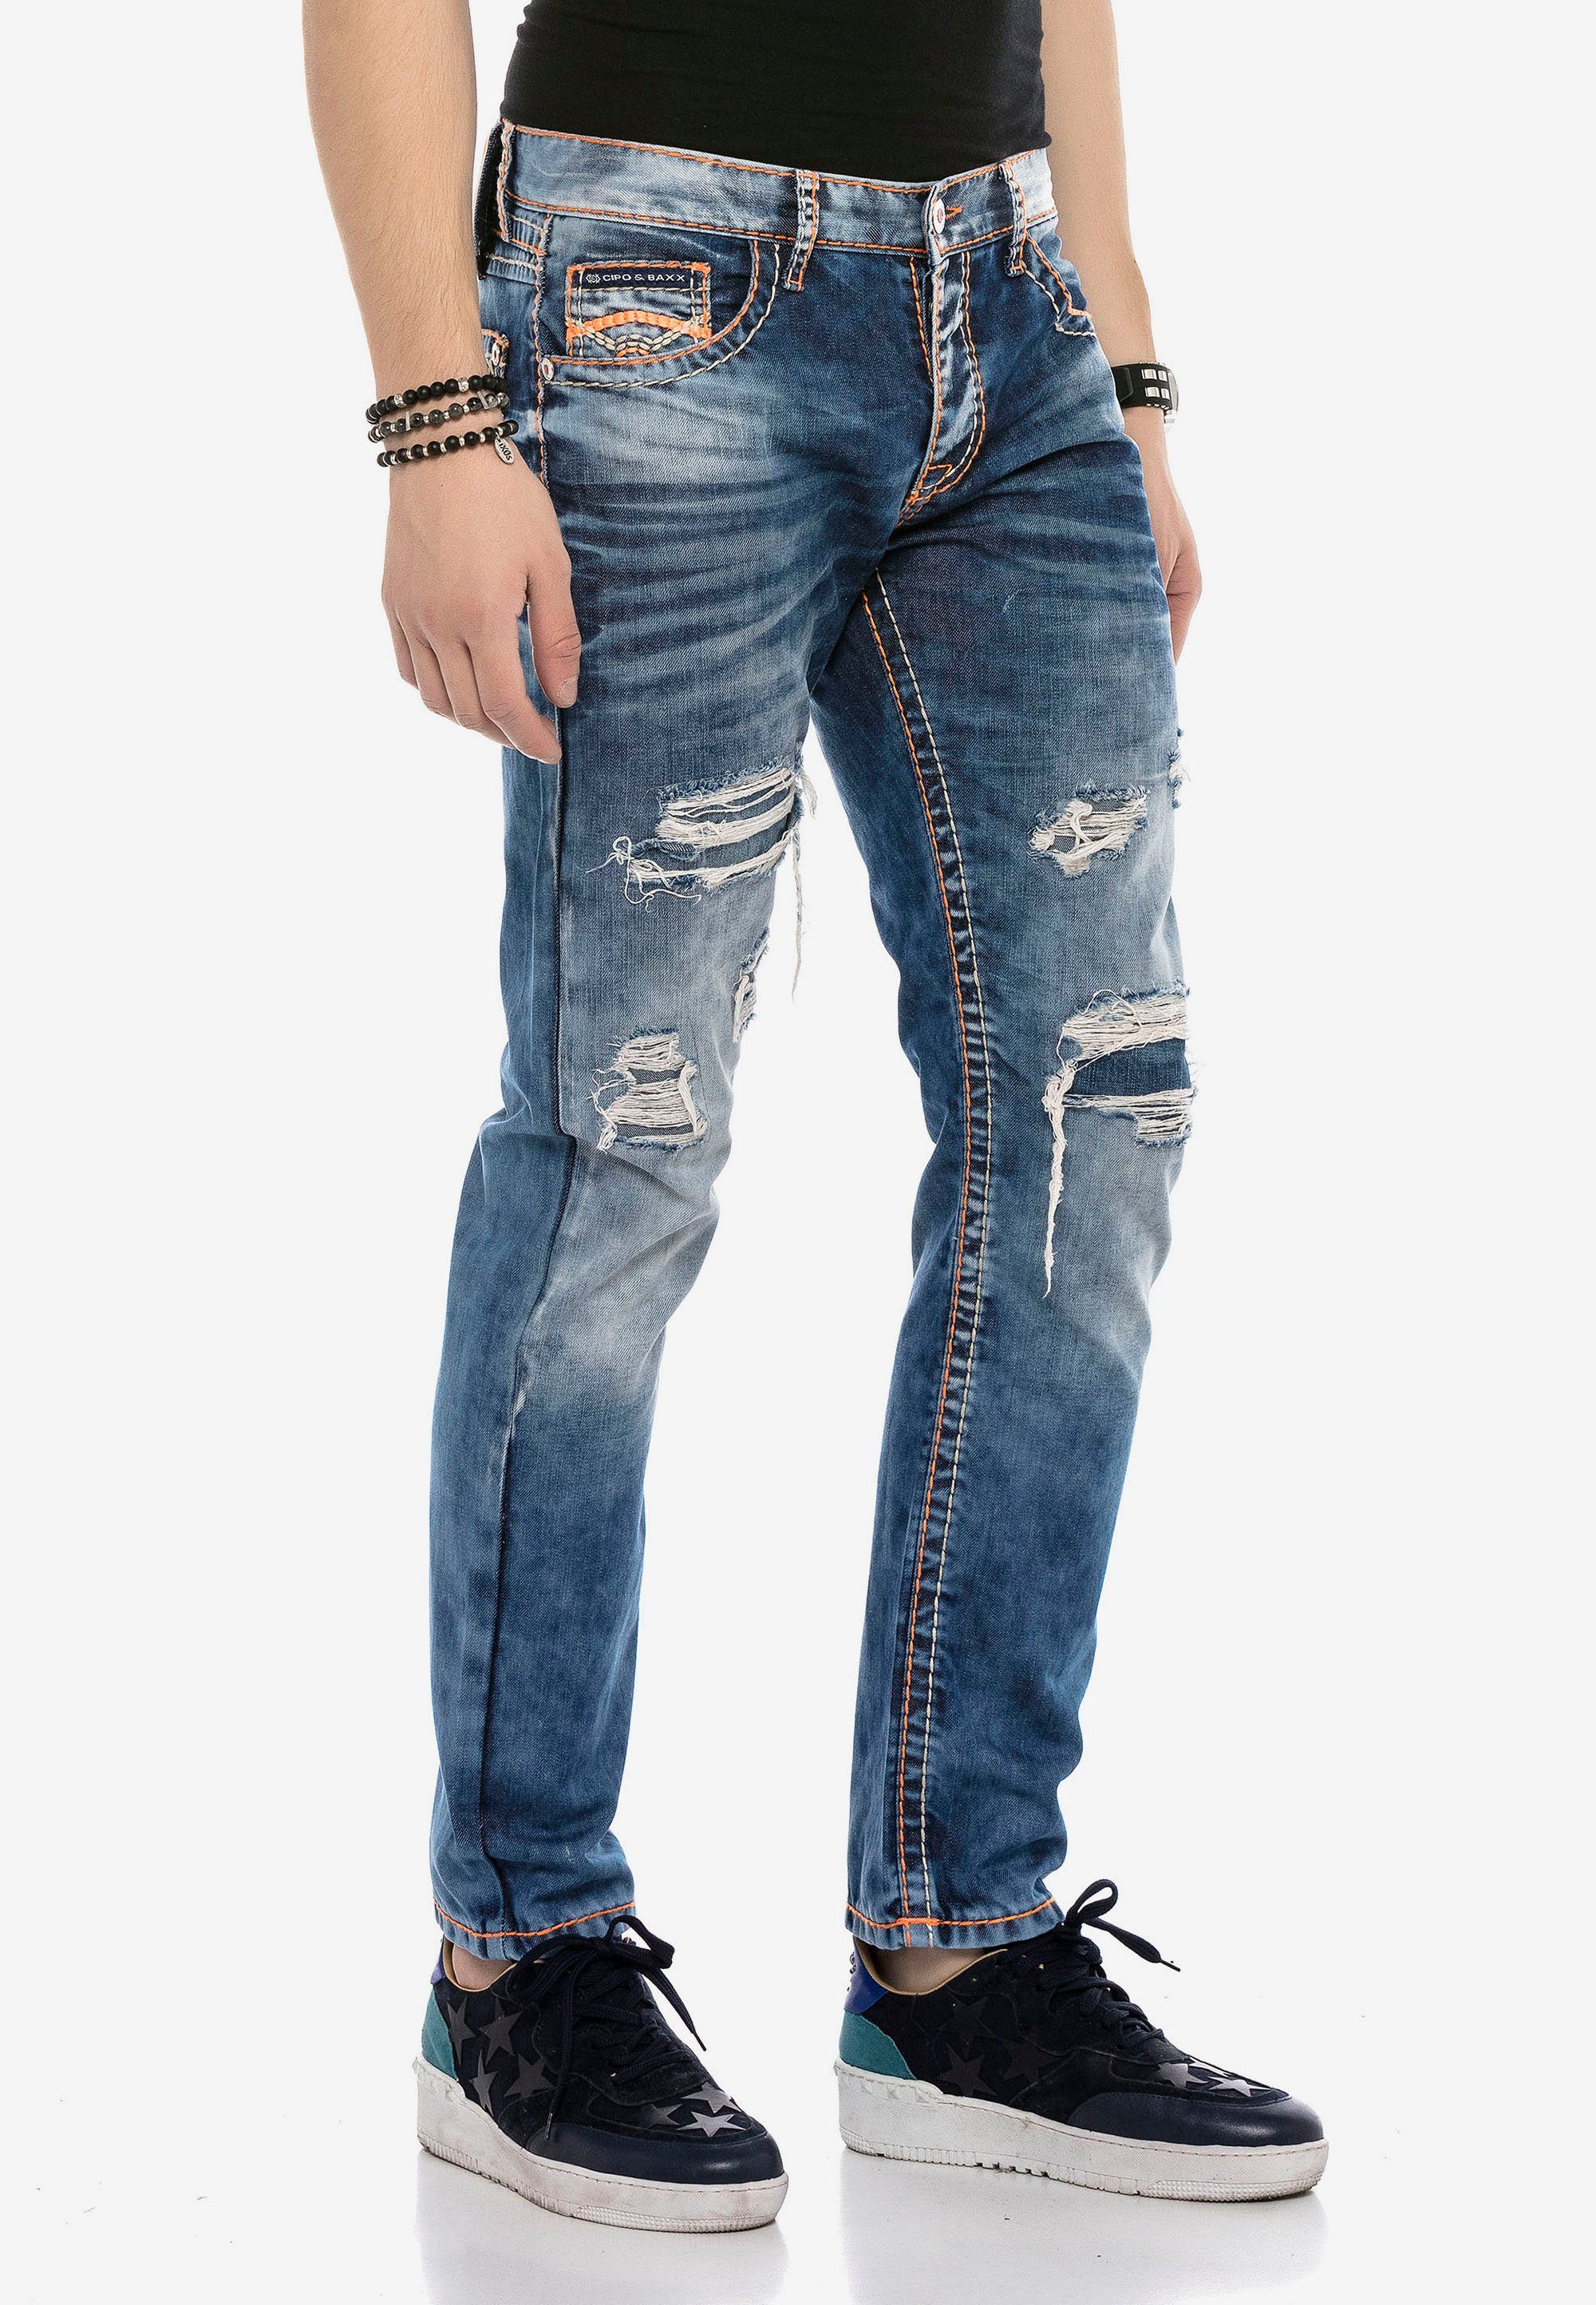 Cipo Bequeme Baxx & Destroyed-Look Jeans im